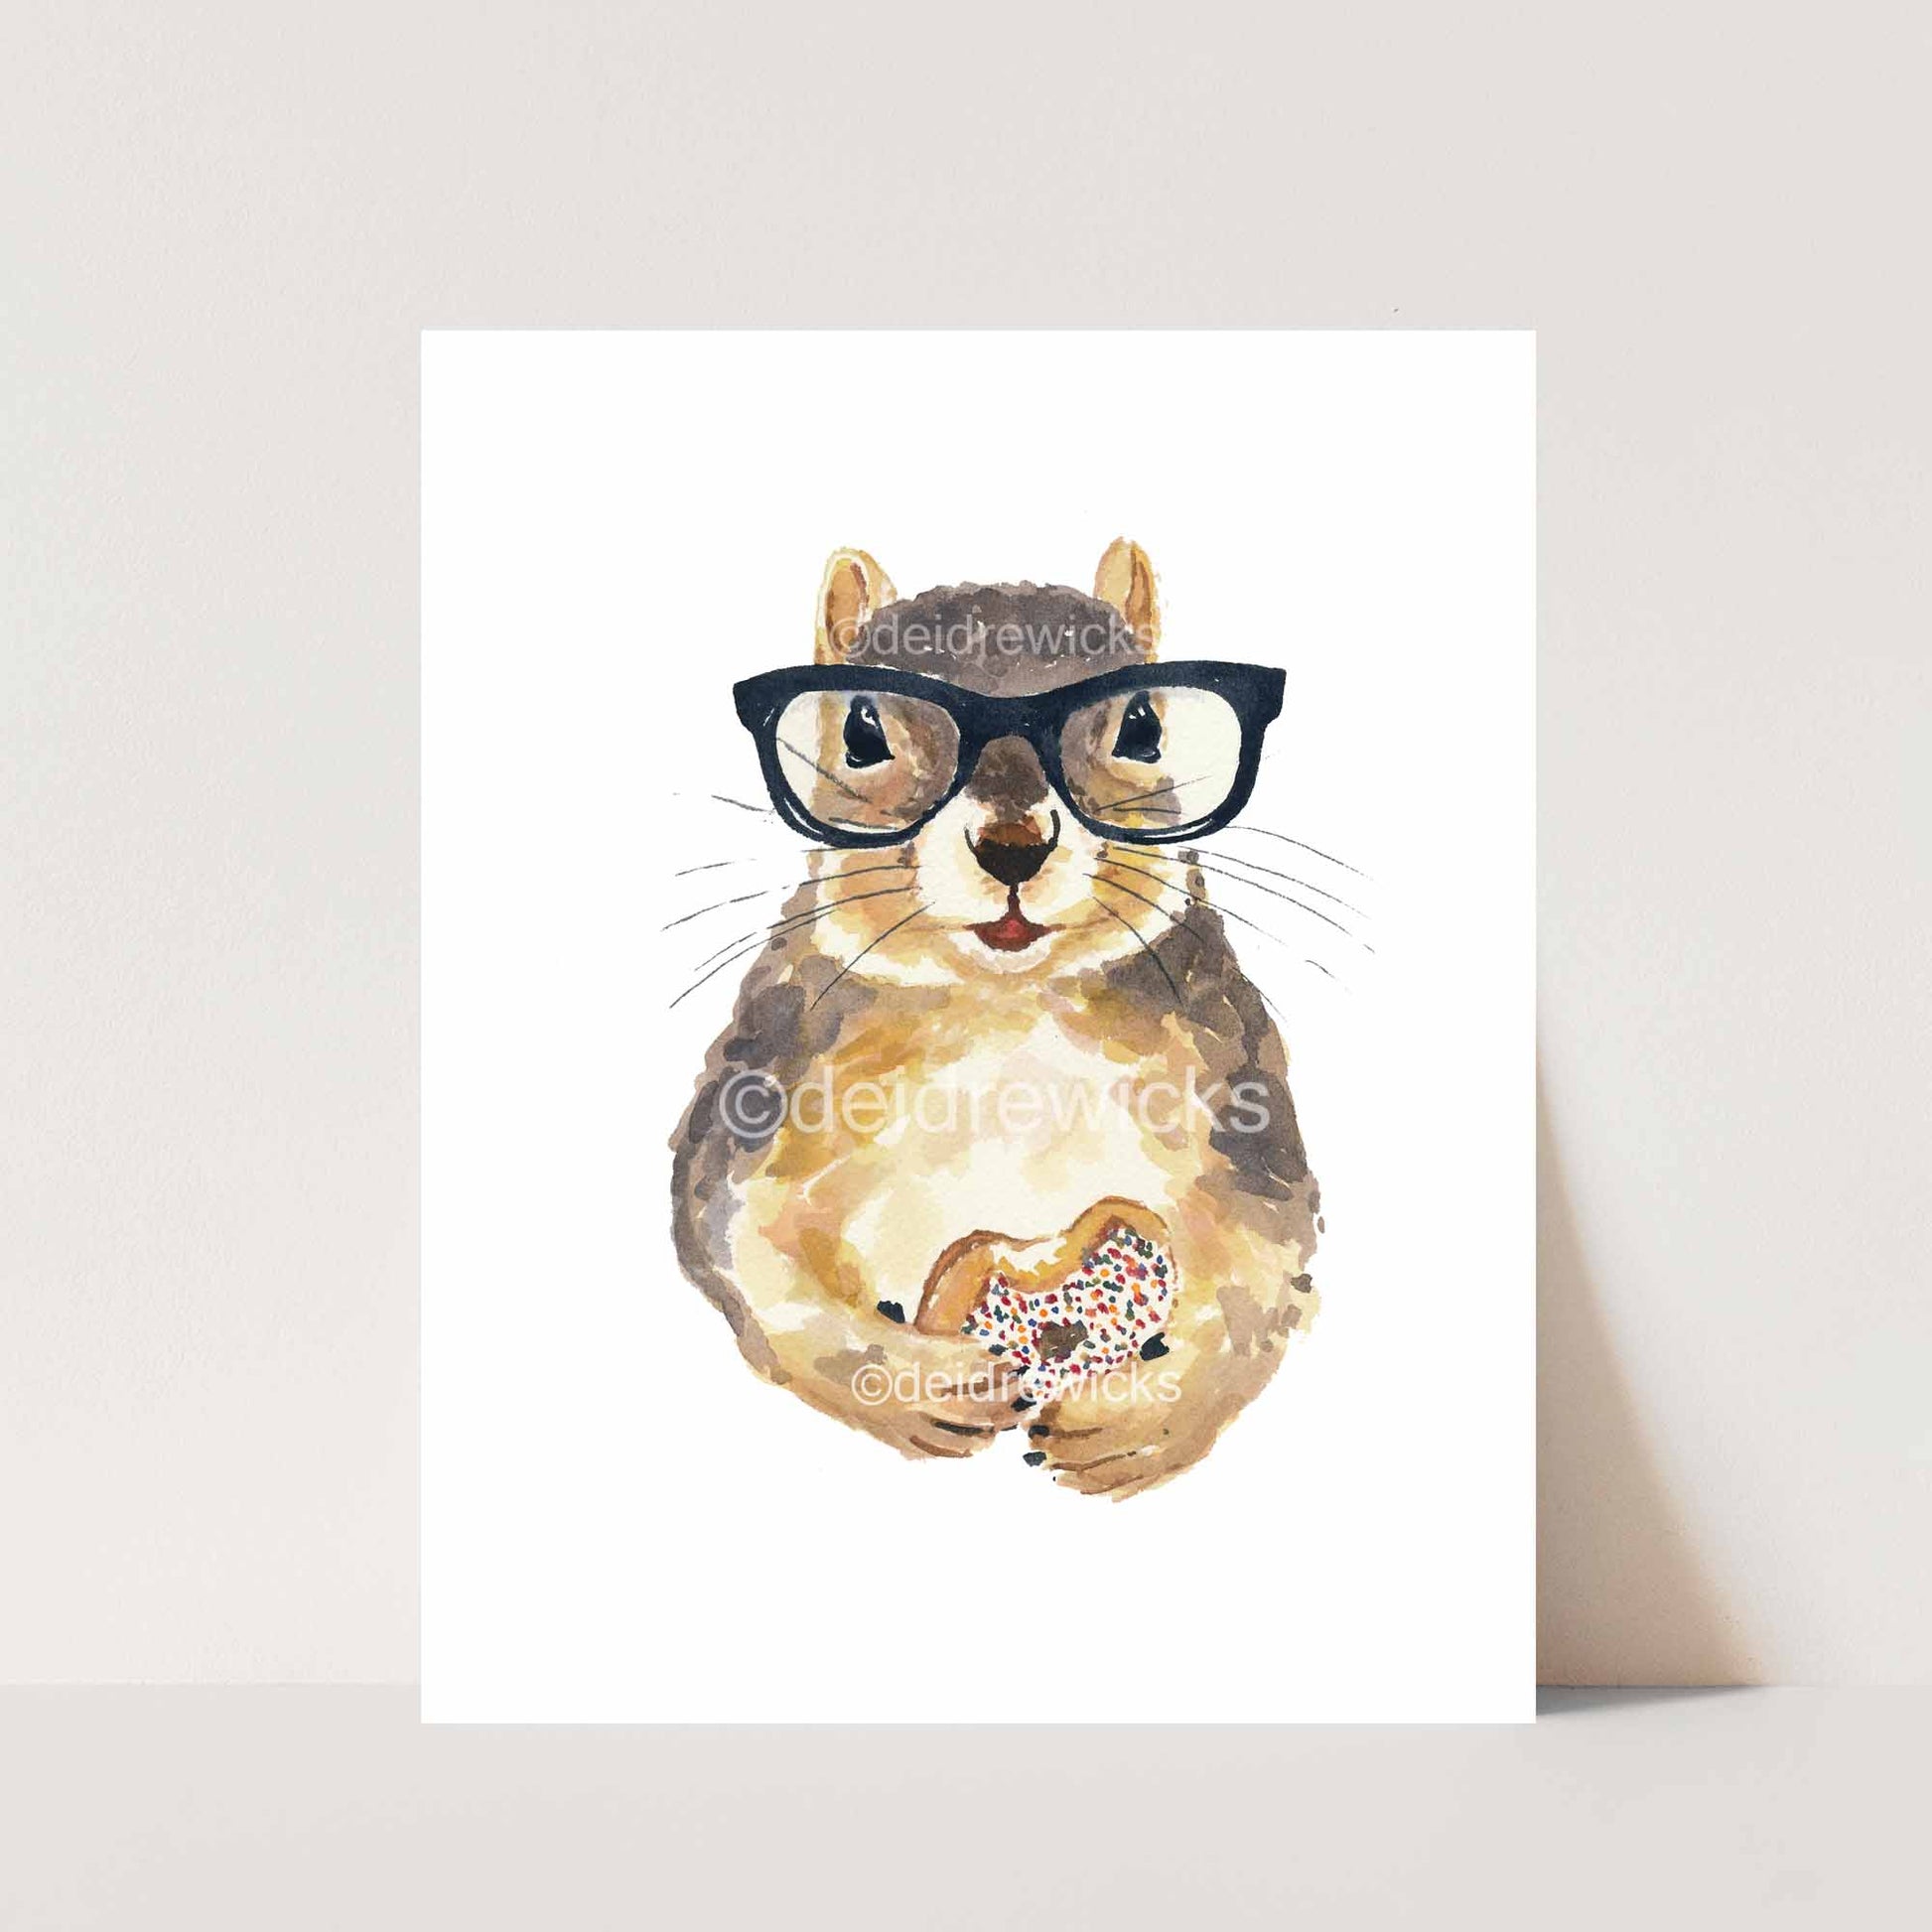 Watercolour painting of a squirrel wearing hipster glasses and eating a donut